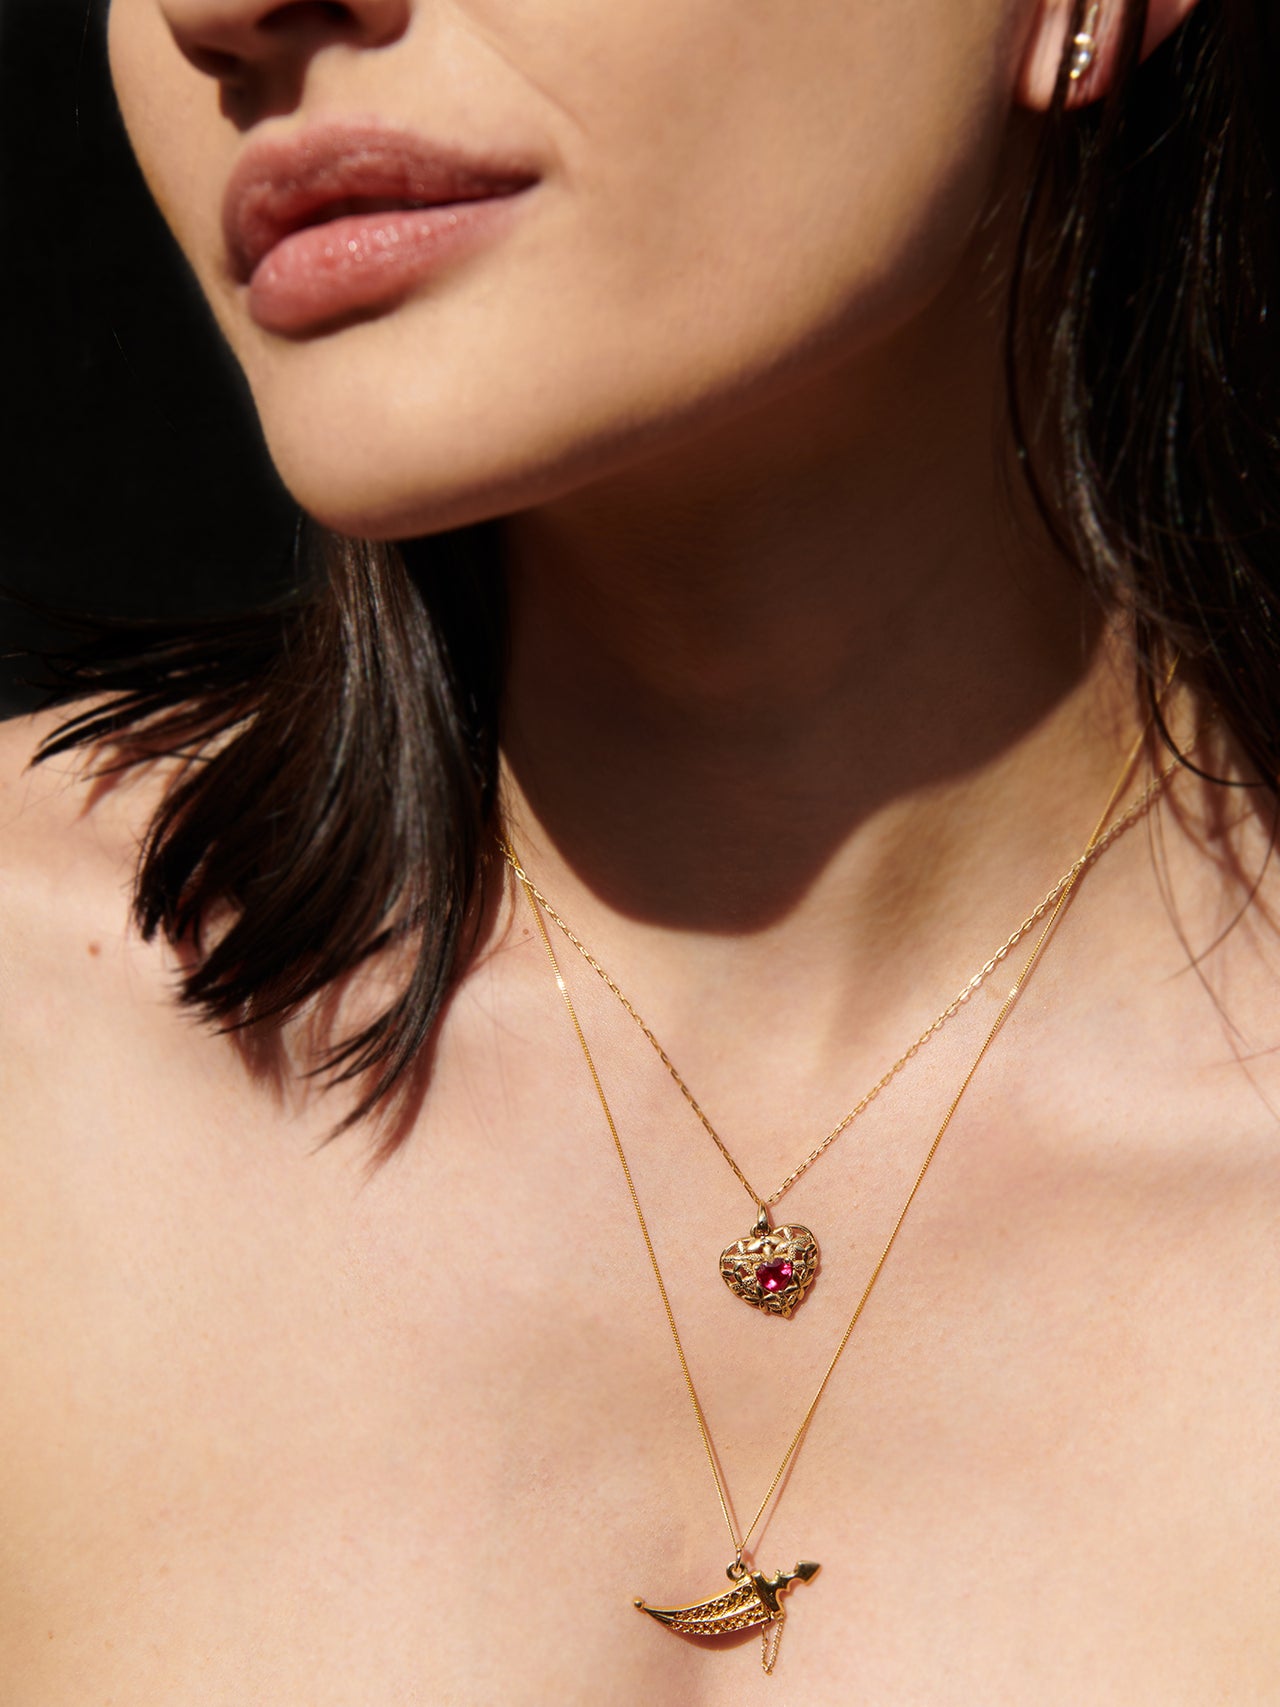 14Kt Yellow Gold Heart Gemstone Pendant Necklace pictured on model. Black background. 